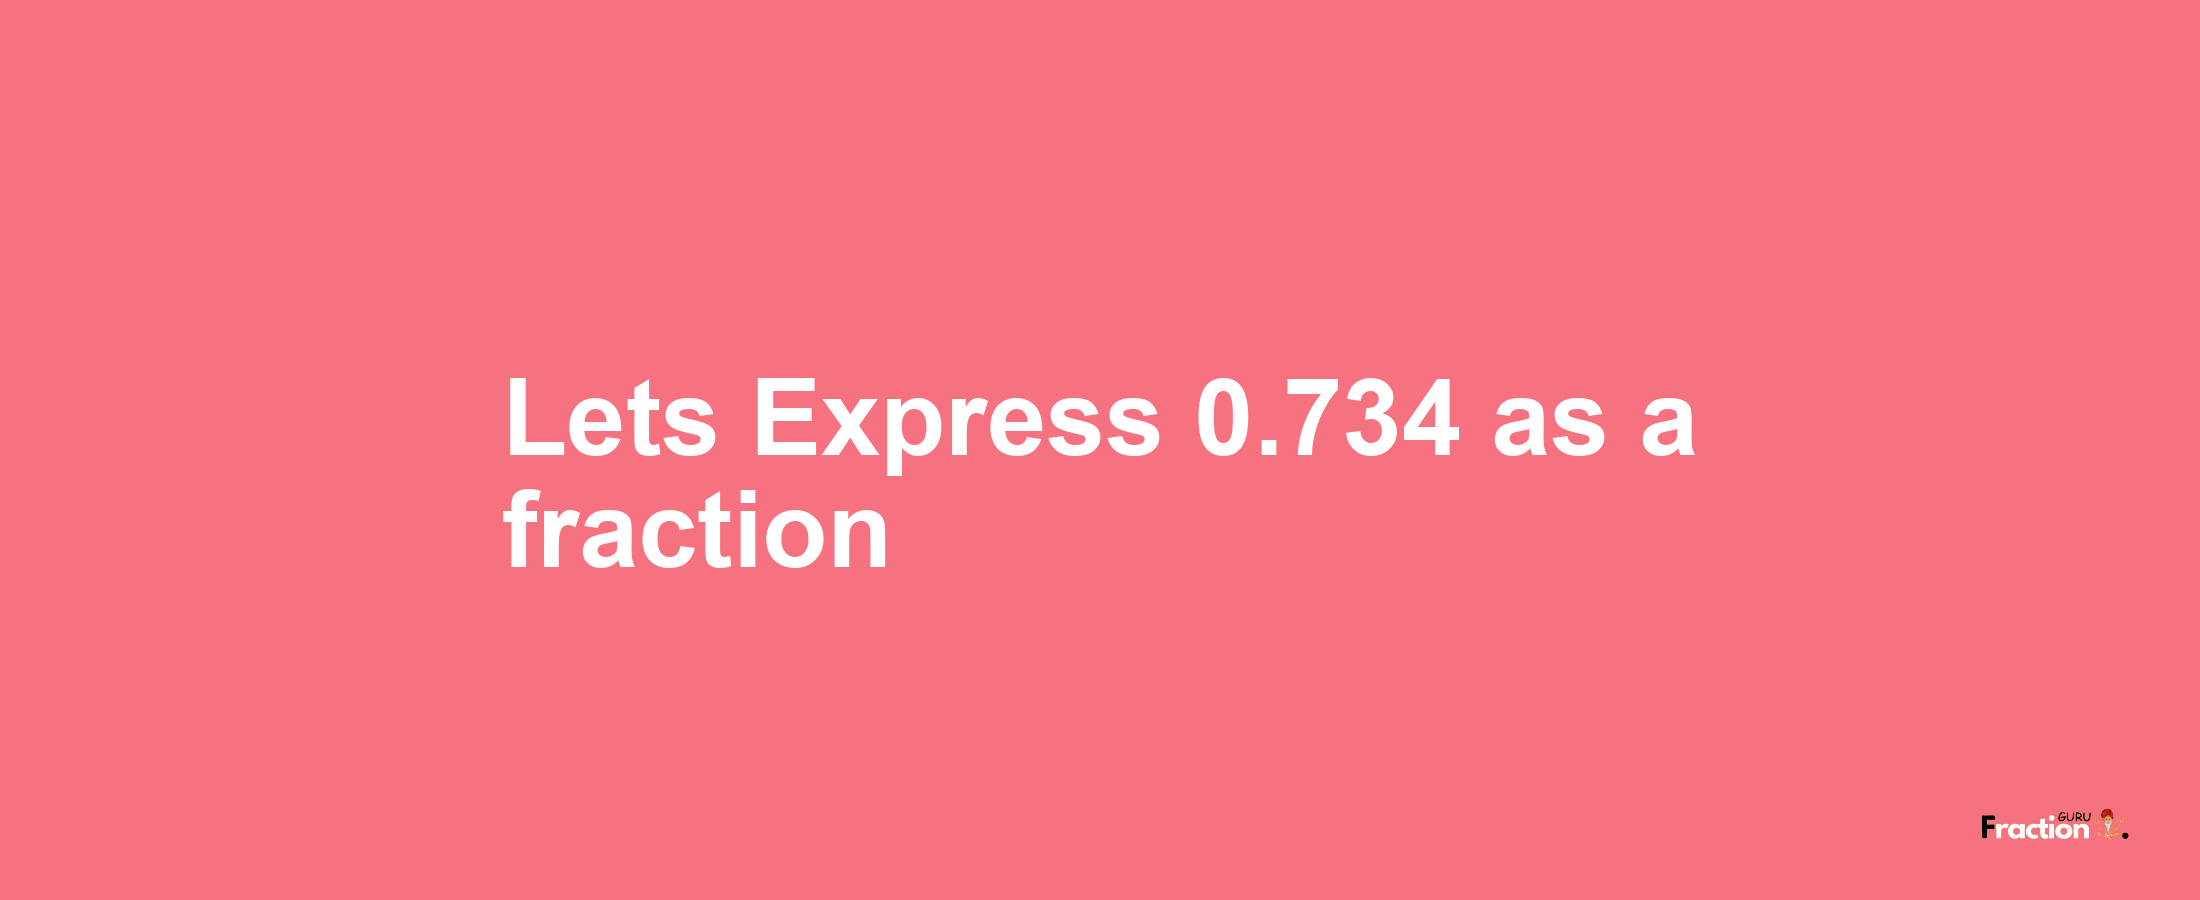 Lets Express 0.734 as afraction